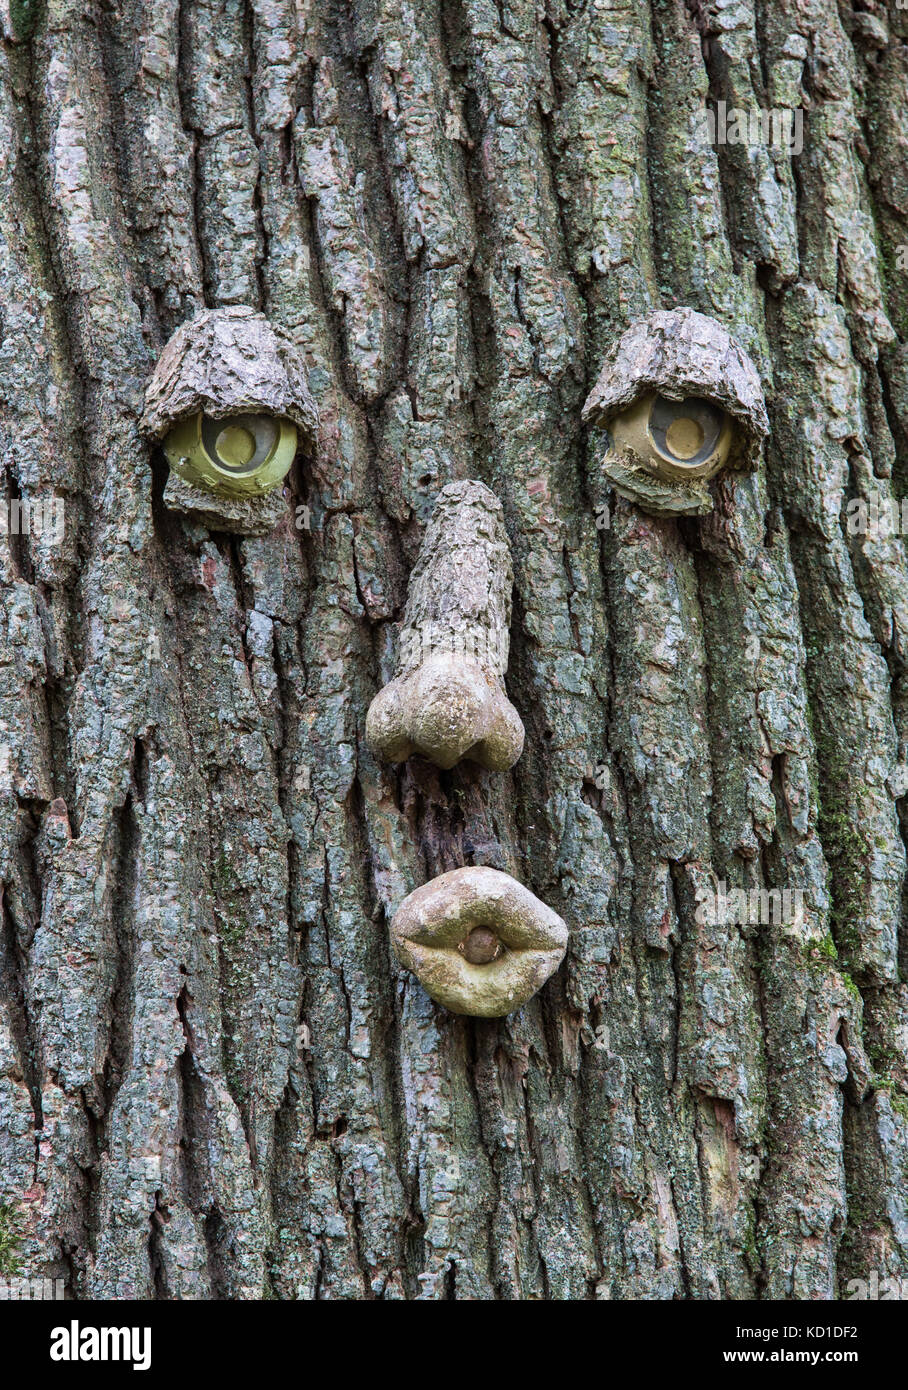 Tree scupture of face Stock Photo